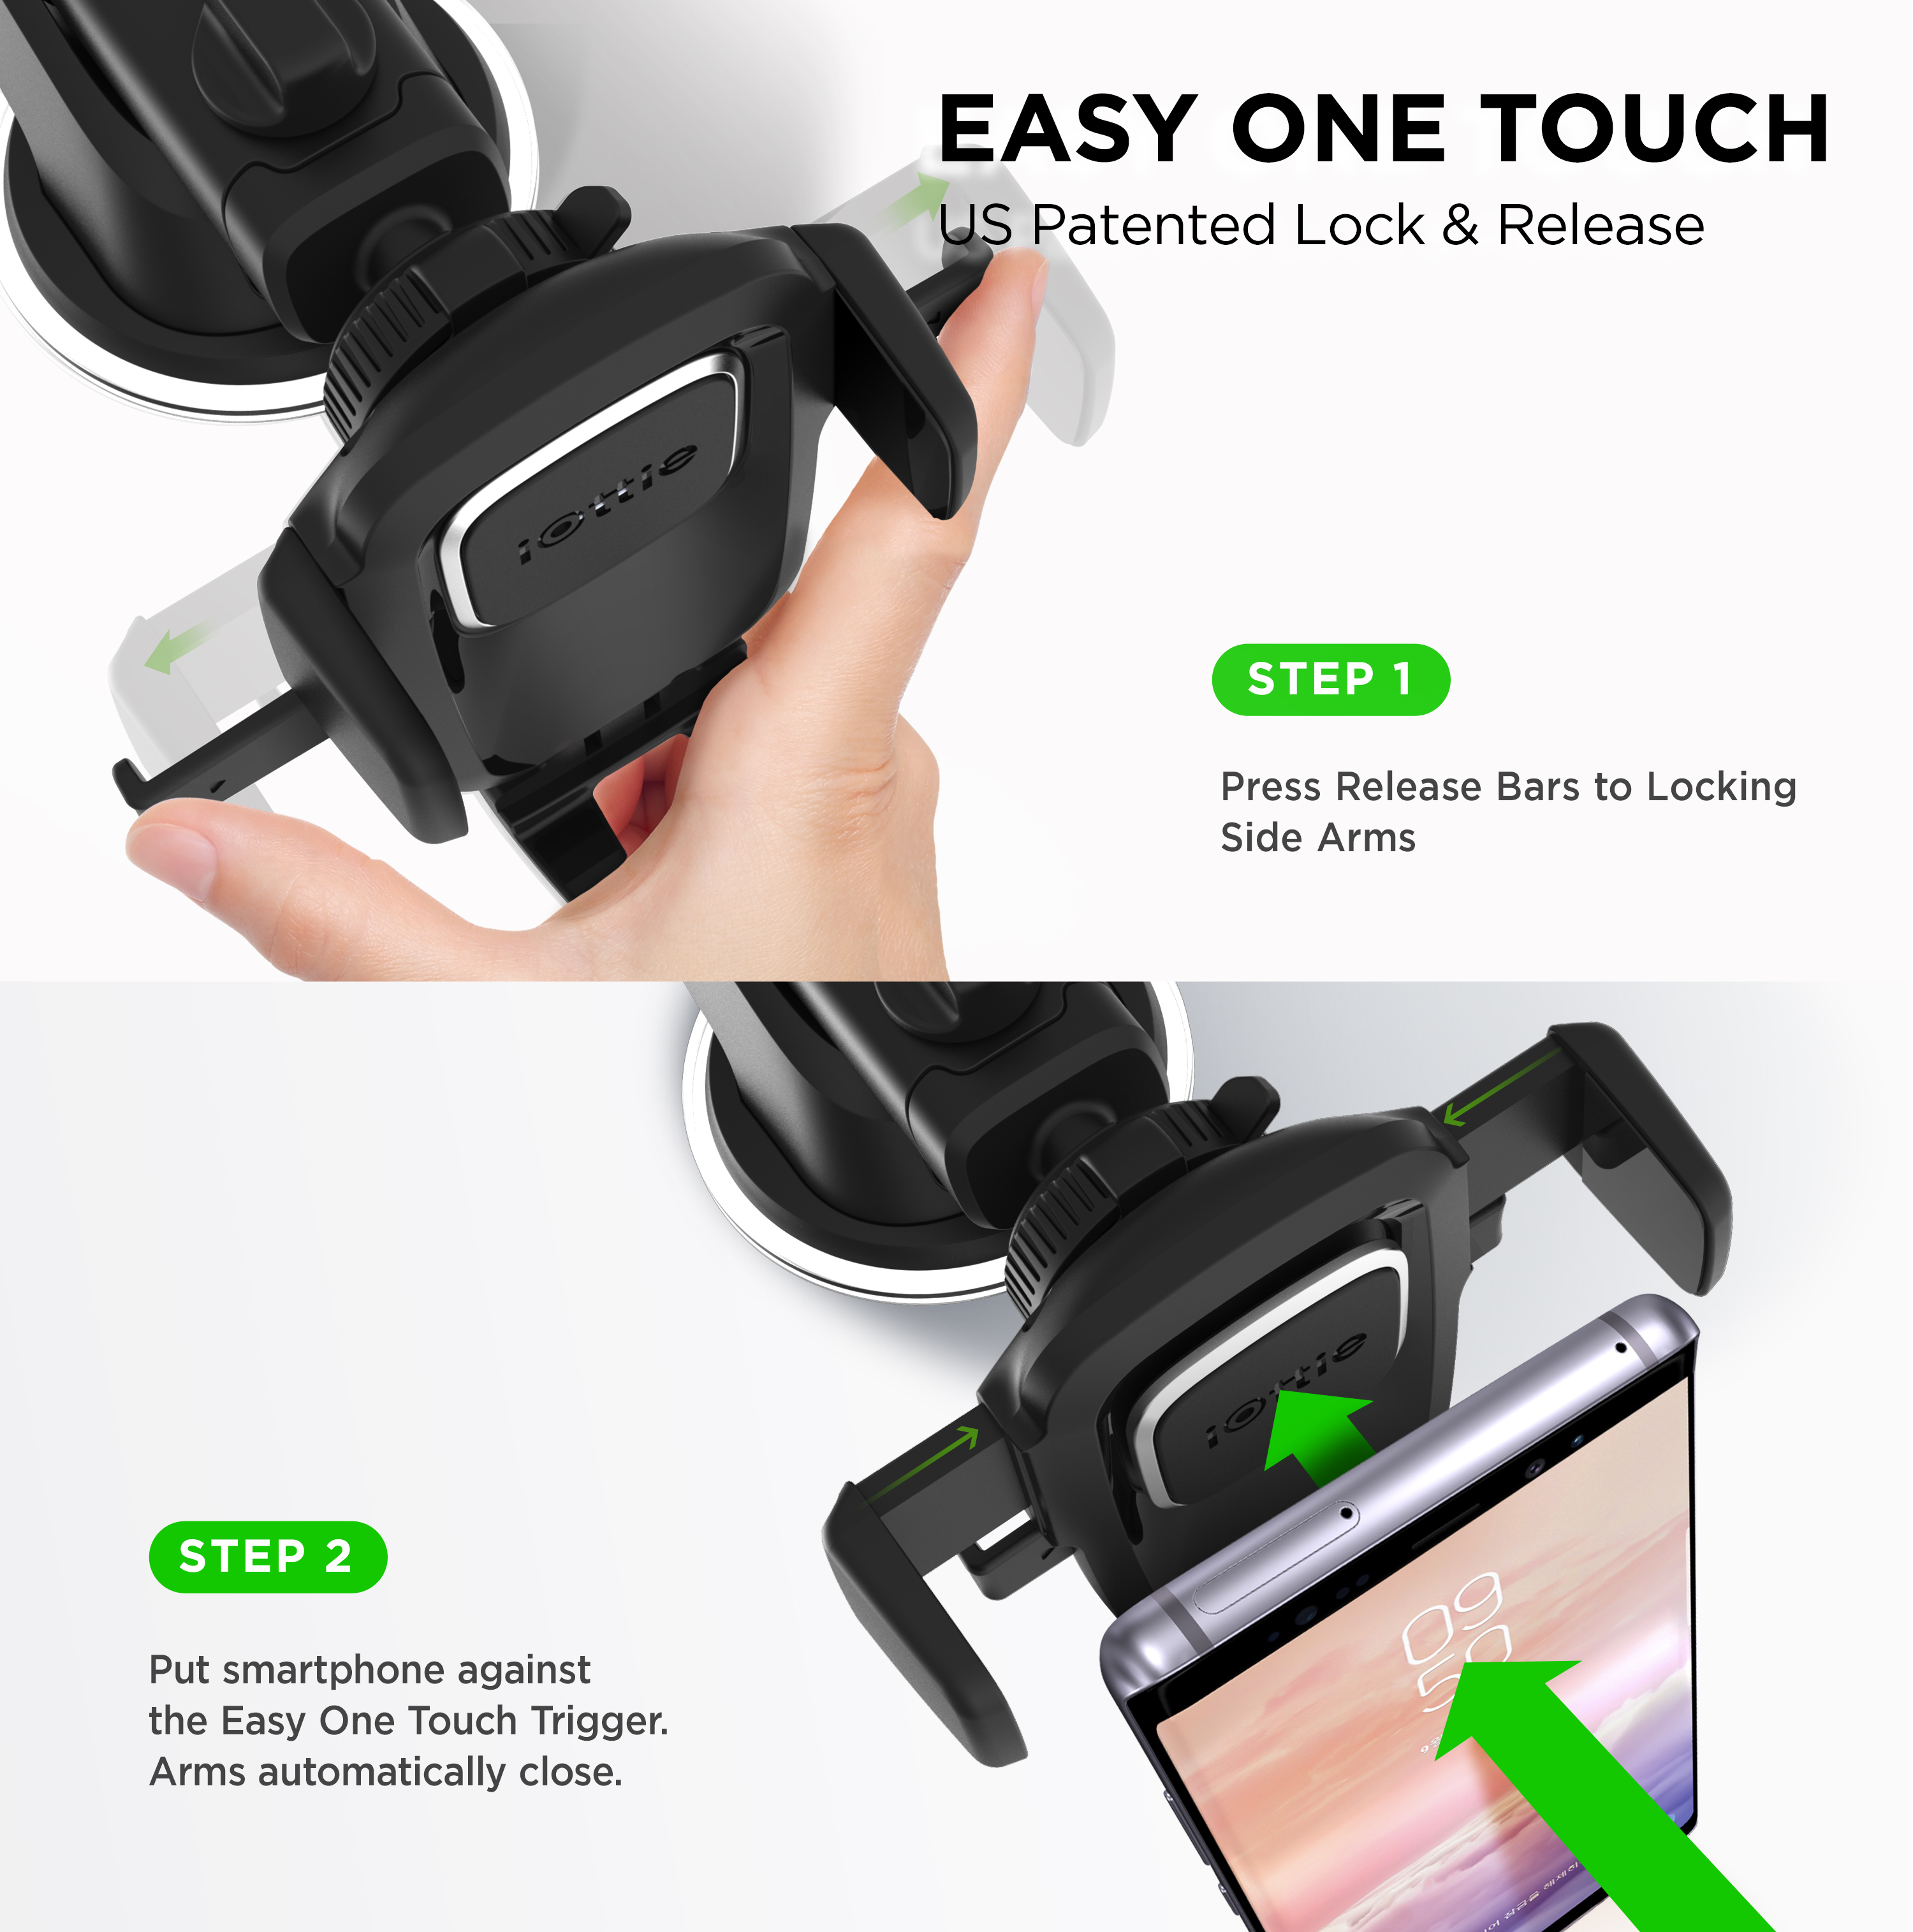 iOttie Easy One Touch 4 Dashboard & Windshield Car Mount Holder for iPhone X, 8, 8 Plus, 7 Plus, 6s Plus, 6 SE, Samsung Galaxy S8 Plus S8 Edge S7 S6 Note 8 5SE - image 4 of 6